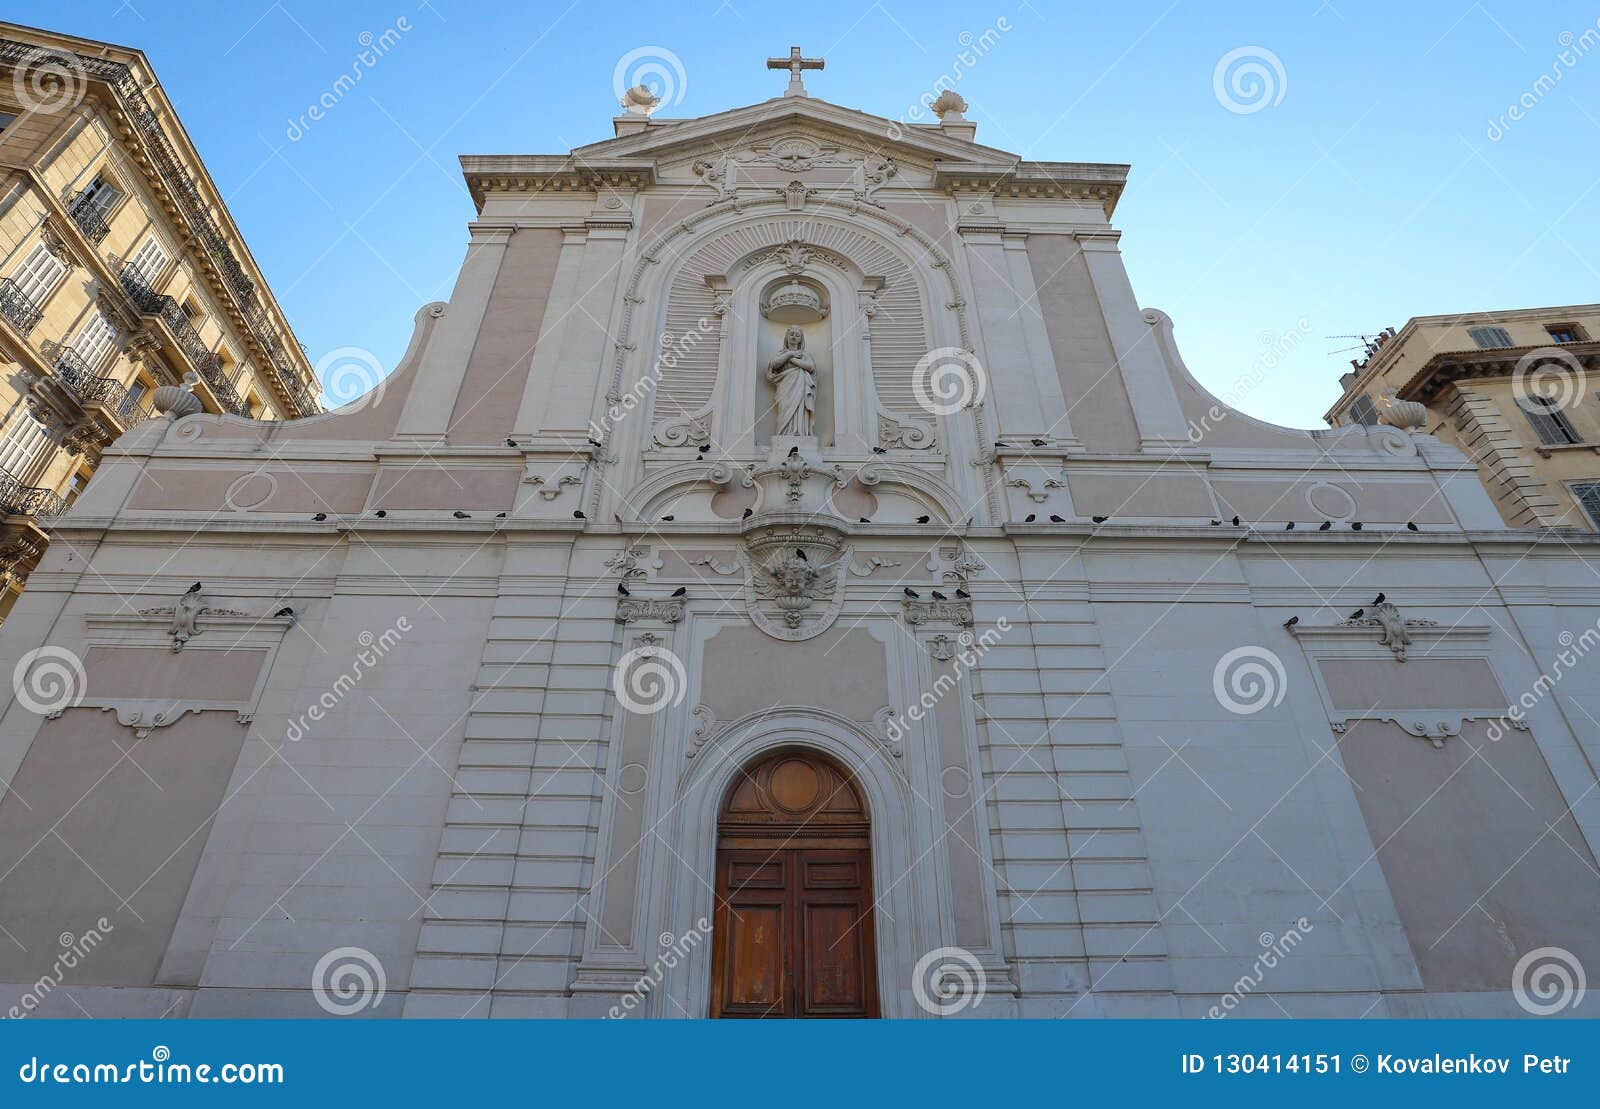 the frontage of the ancient church saint ferreol ,marseille , south france